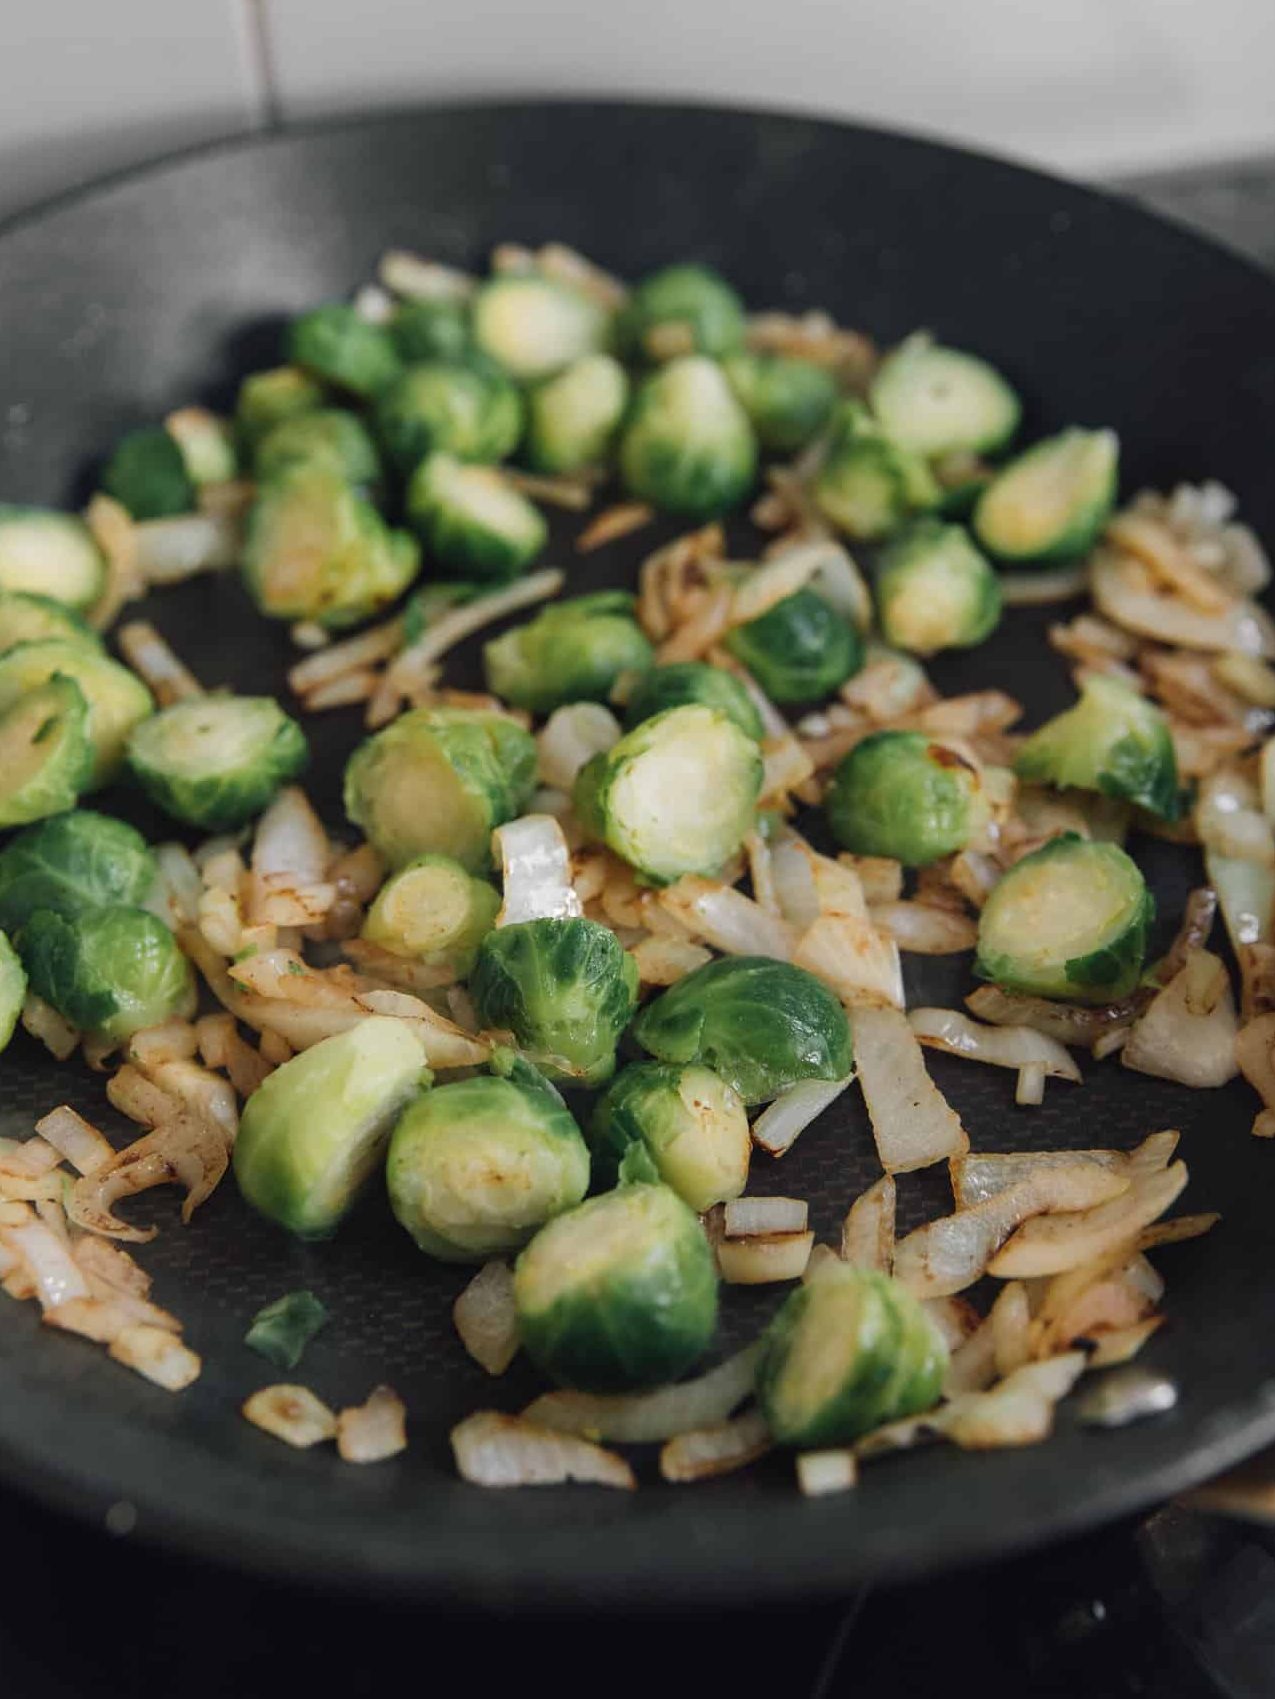 Cut the Brussel Spouts in half and add to the pan.